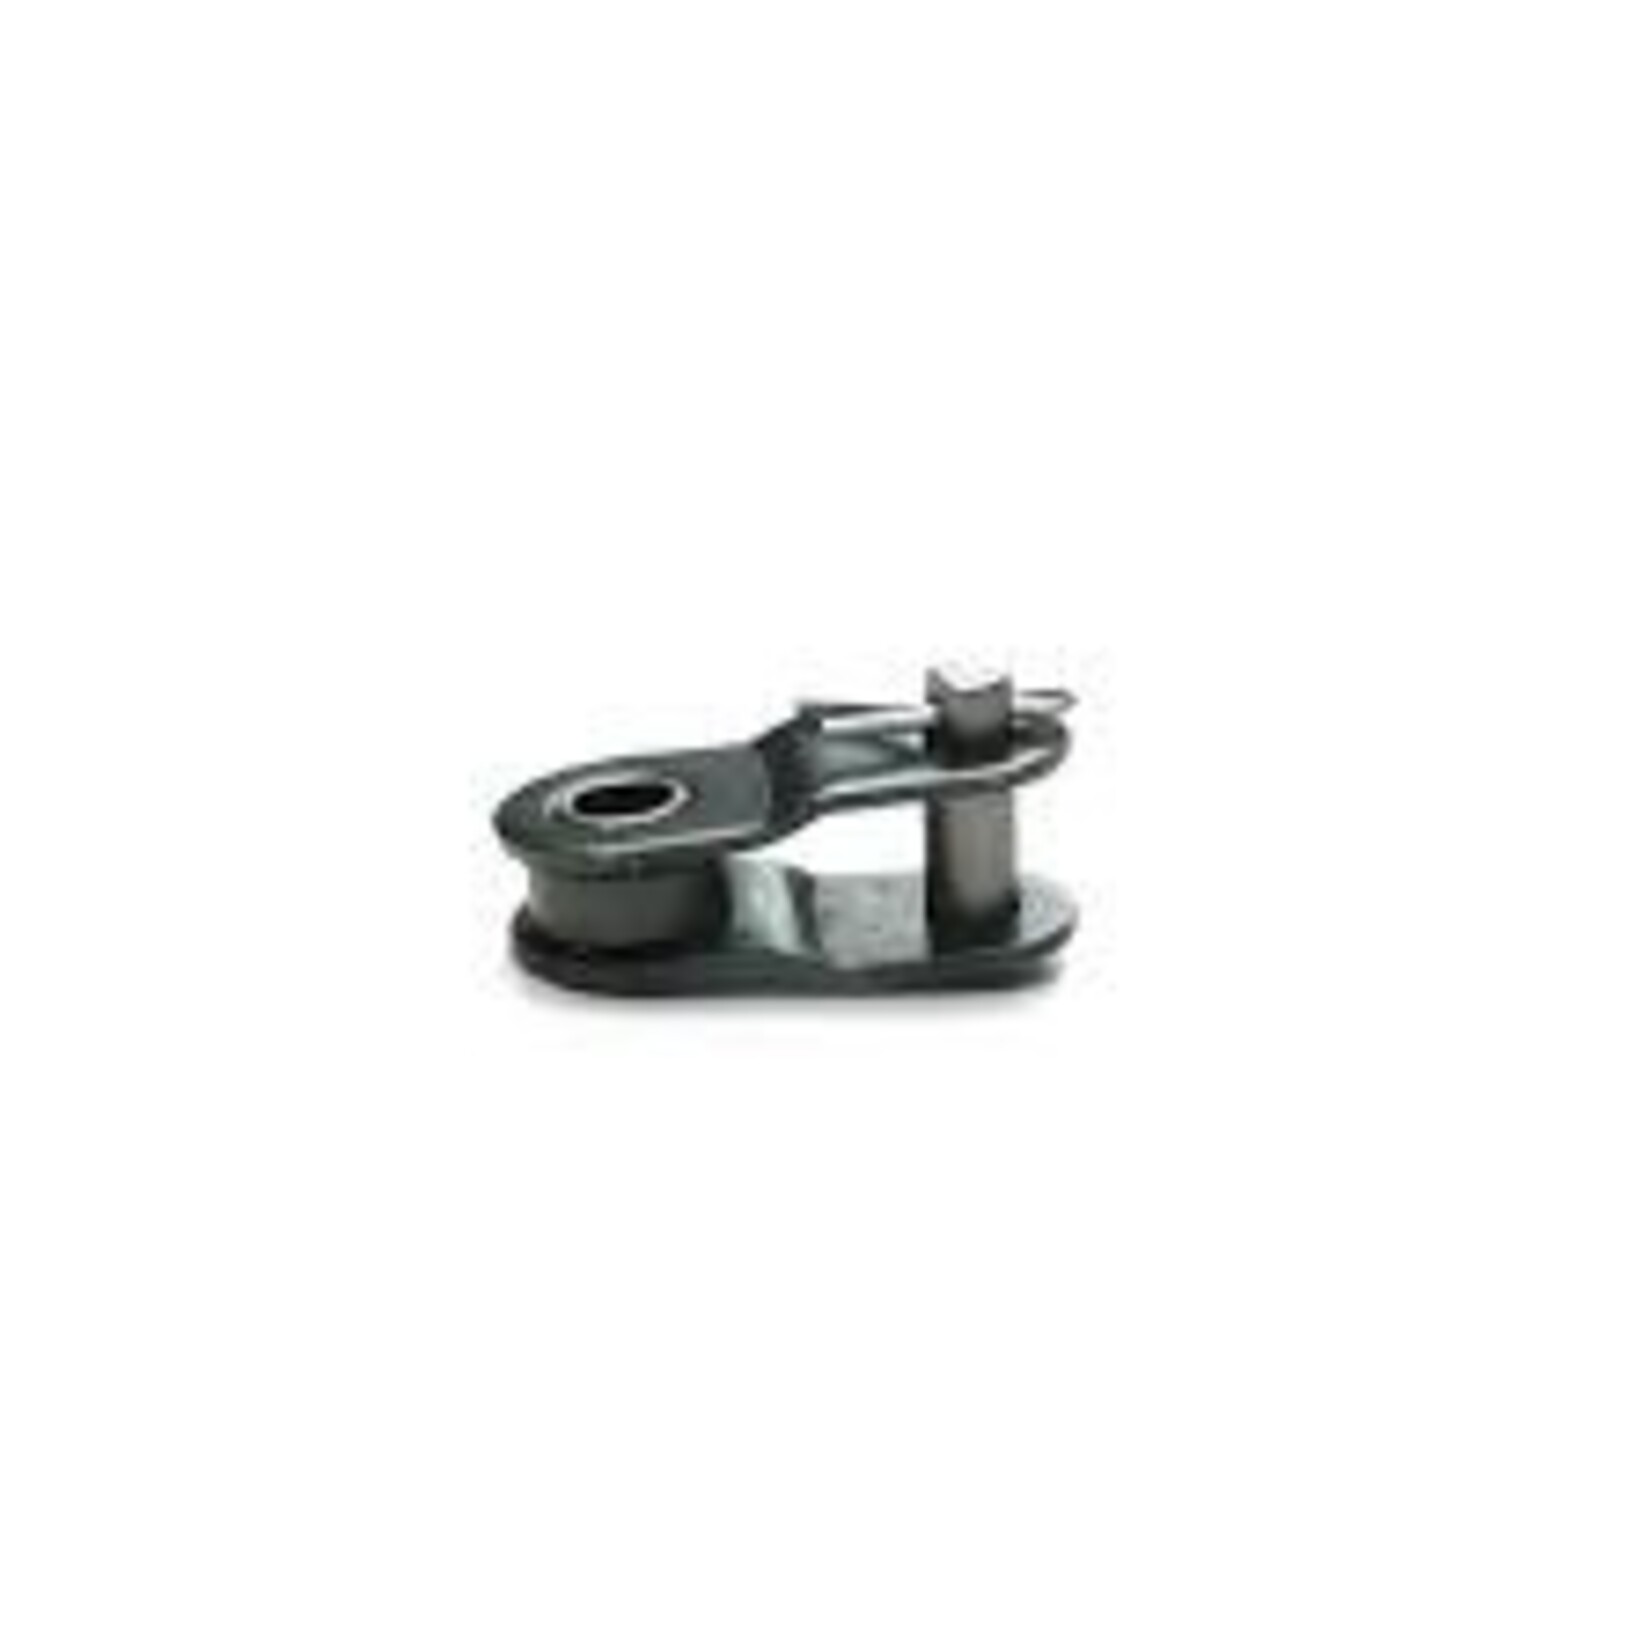 BPW OFFSET LINK - For 1/2" x 1/8" Chain, One Pitch (Half Link), BLACK (Sold Individually) (YBN)